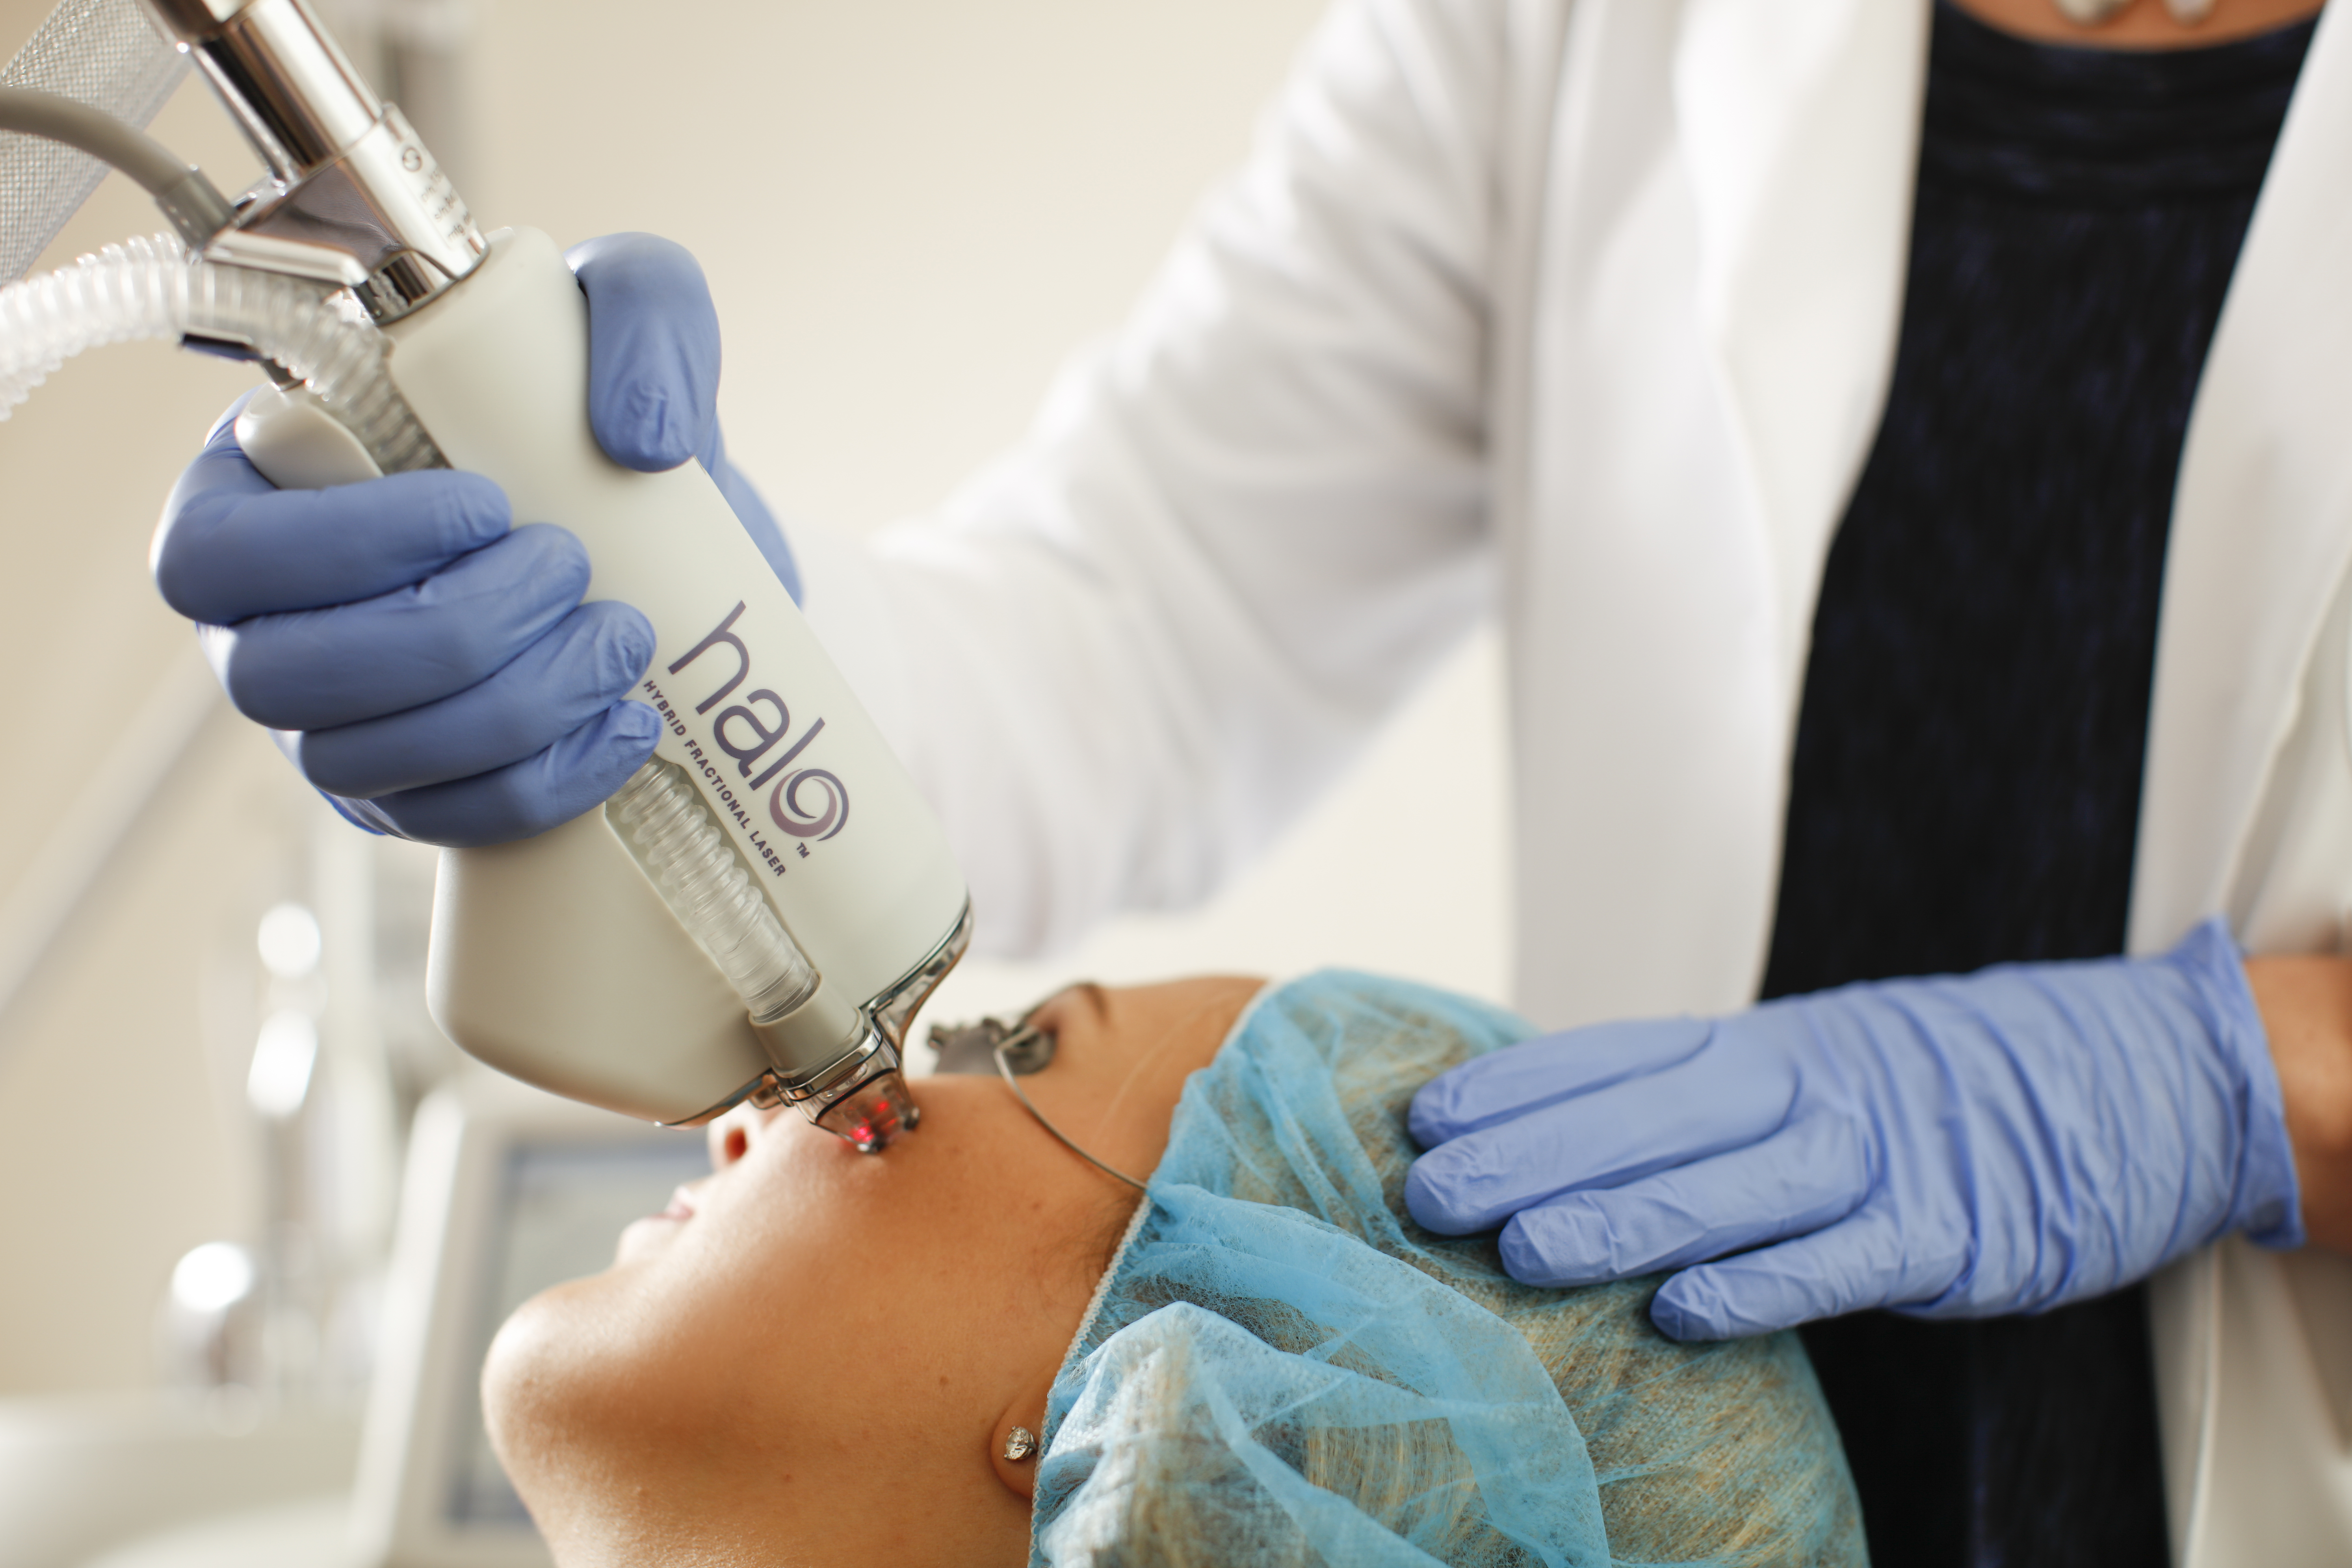 The Halo hybrid fractional laser devise is applied to a patient's face for laser skin resurfacing.